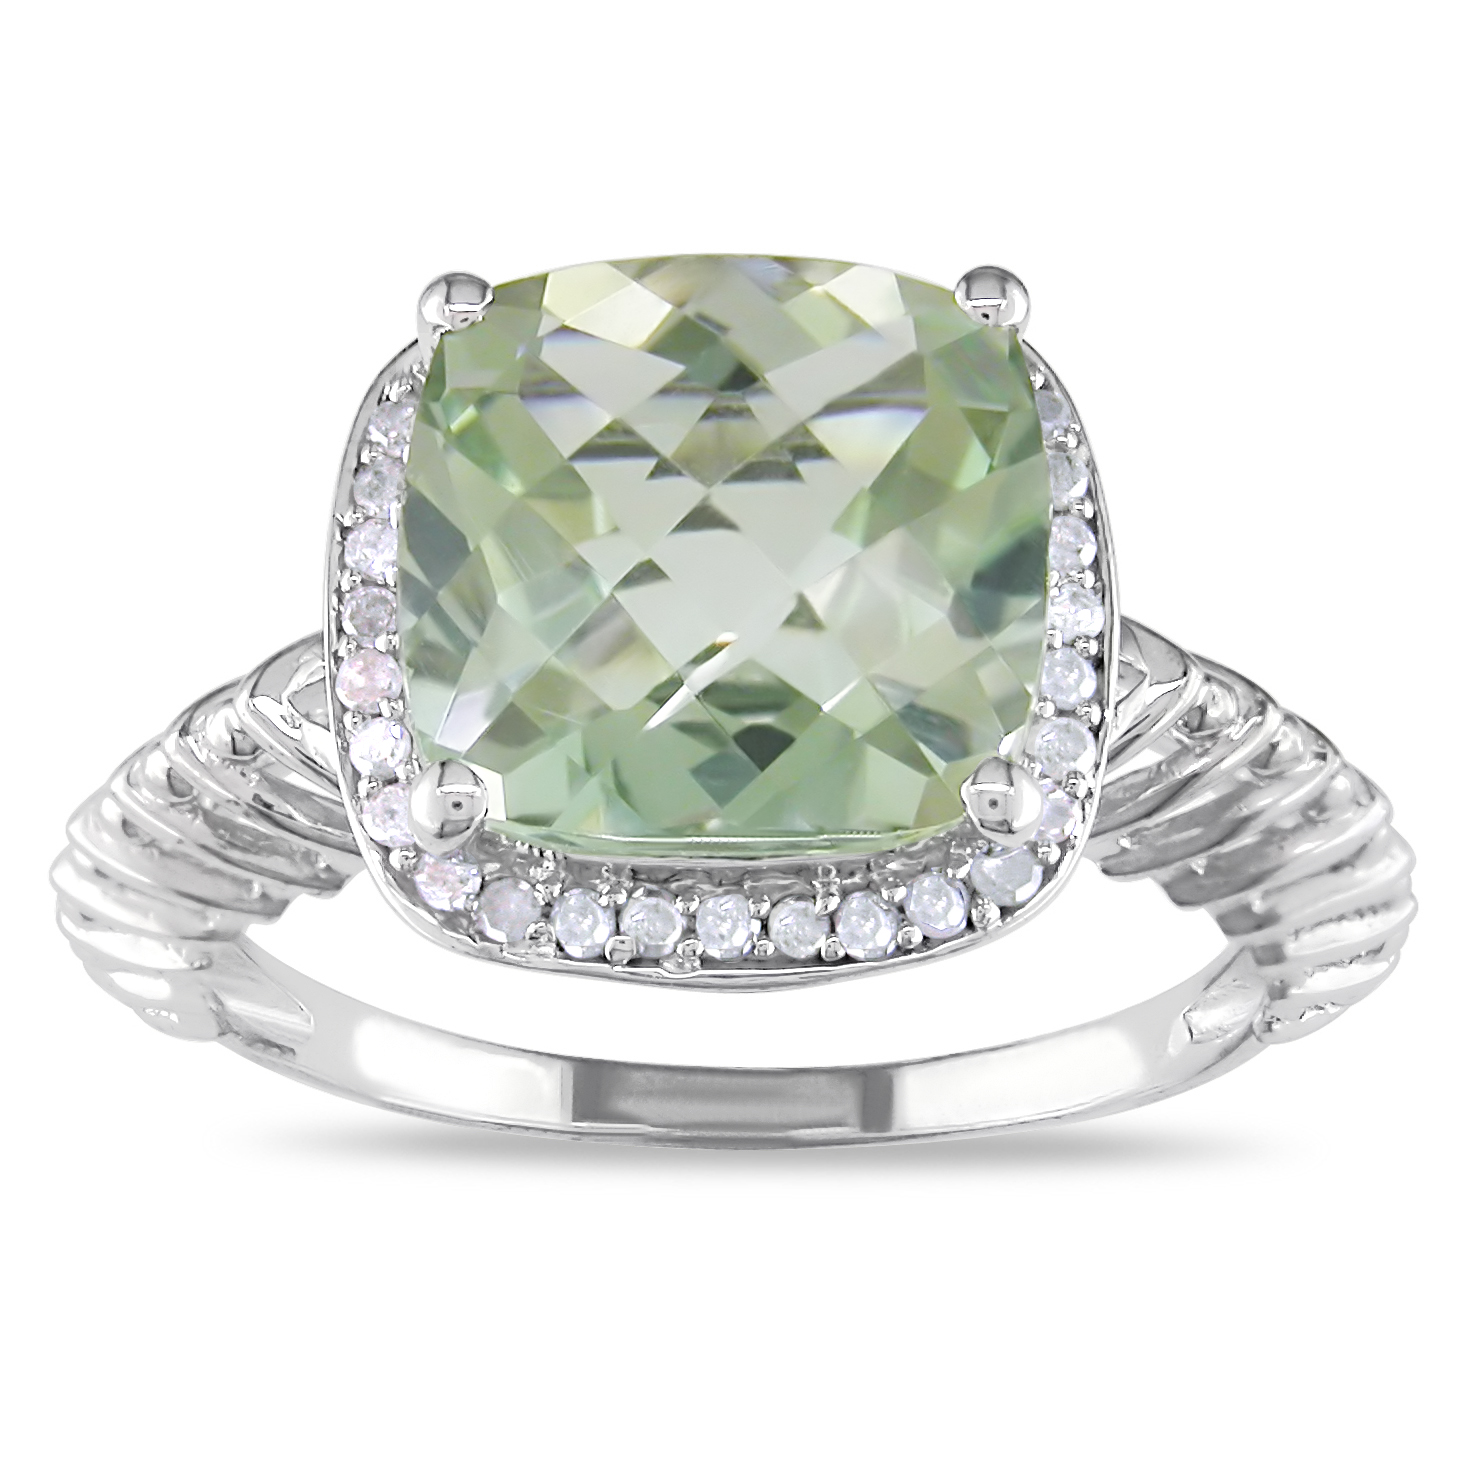 Amour 1/6 Carat T.W. Diamond and 4 Carat T.G.W. Green Amethyst Fashion Ring in Sterling Silver GH I3